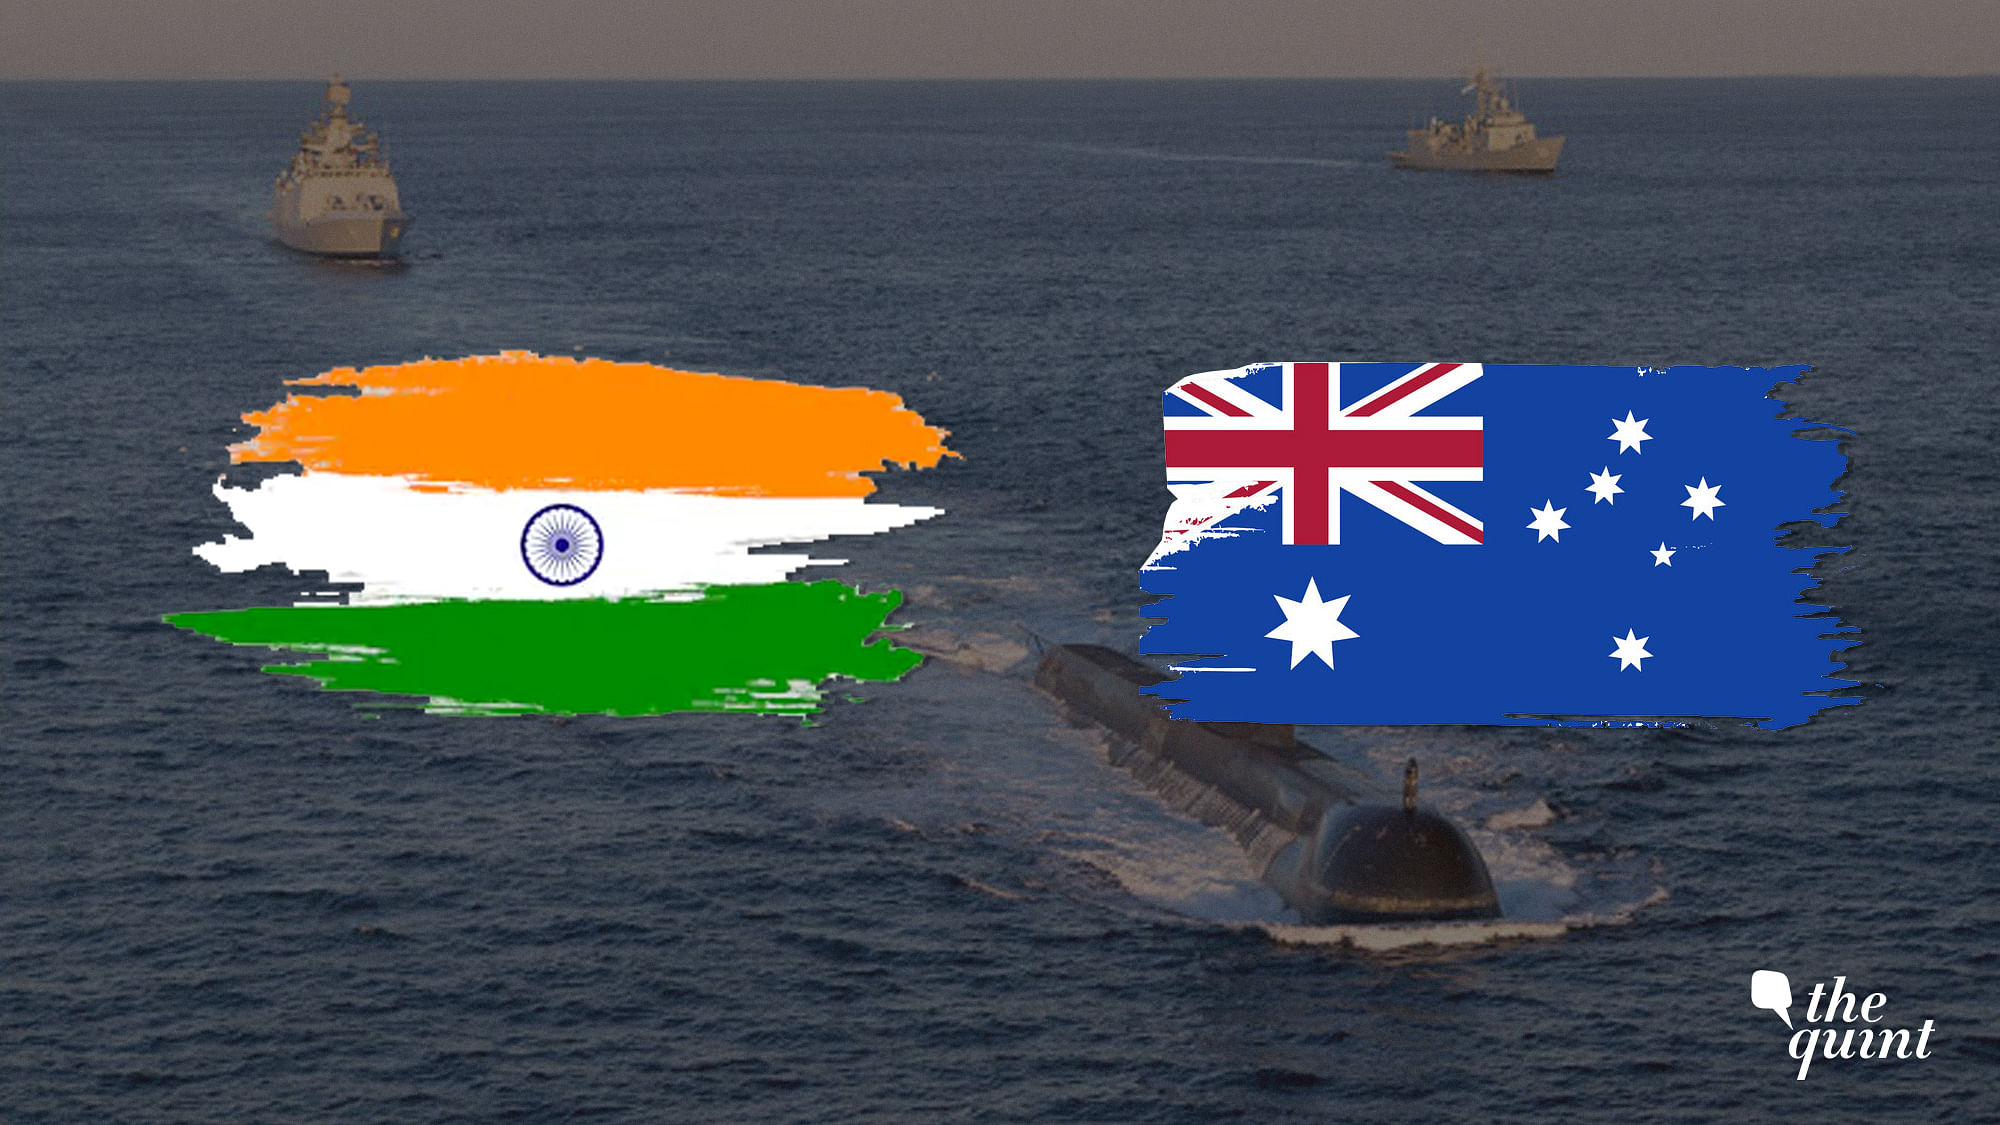 Three experts dissect the nature of India-Australia ties, the message it may send to China and the significance of the Quad.